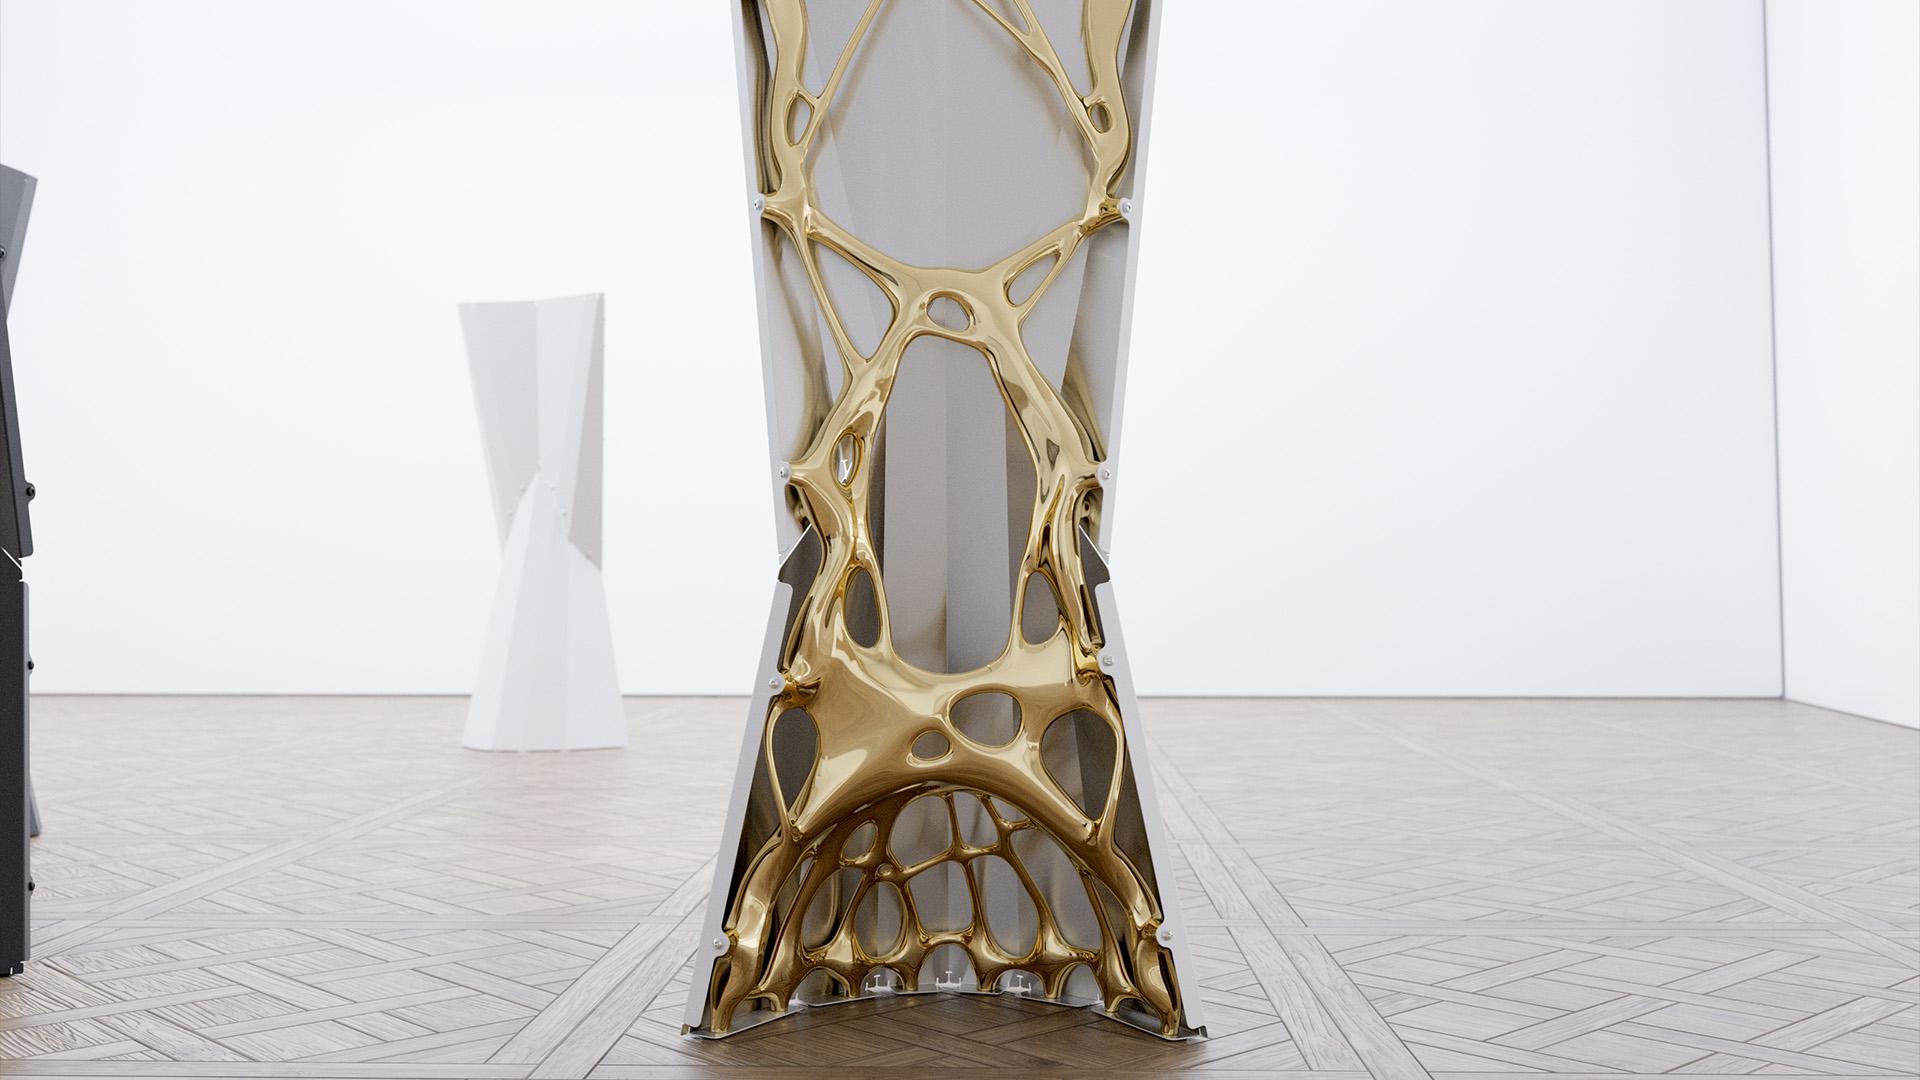 Singularity Sculpture sees Duffy realise the Singularity design concept in its purest form; crafting a showcase sculptural piece from the byproduct off AI generative programming – brought to life in a combination of stunning matte and metallic